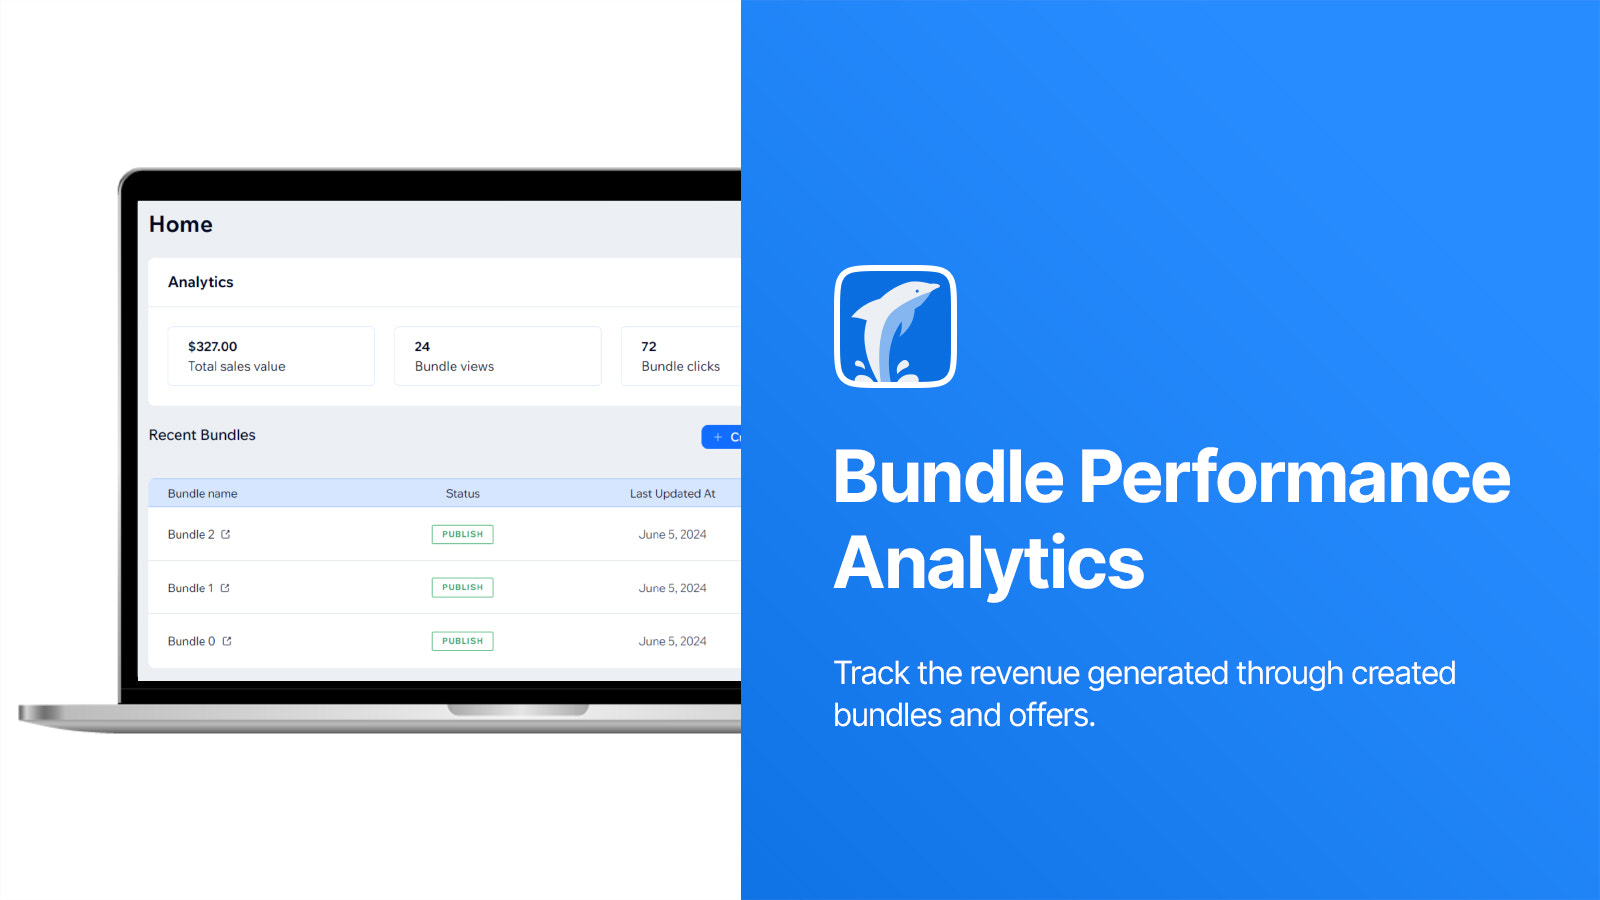 Track the revenue generated through created bundles and offers